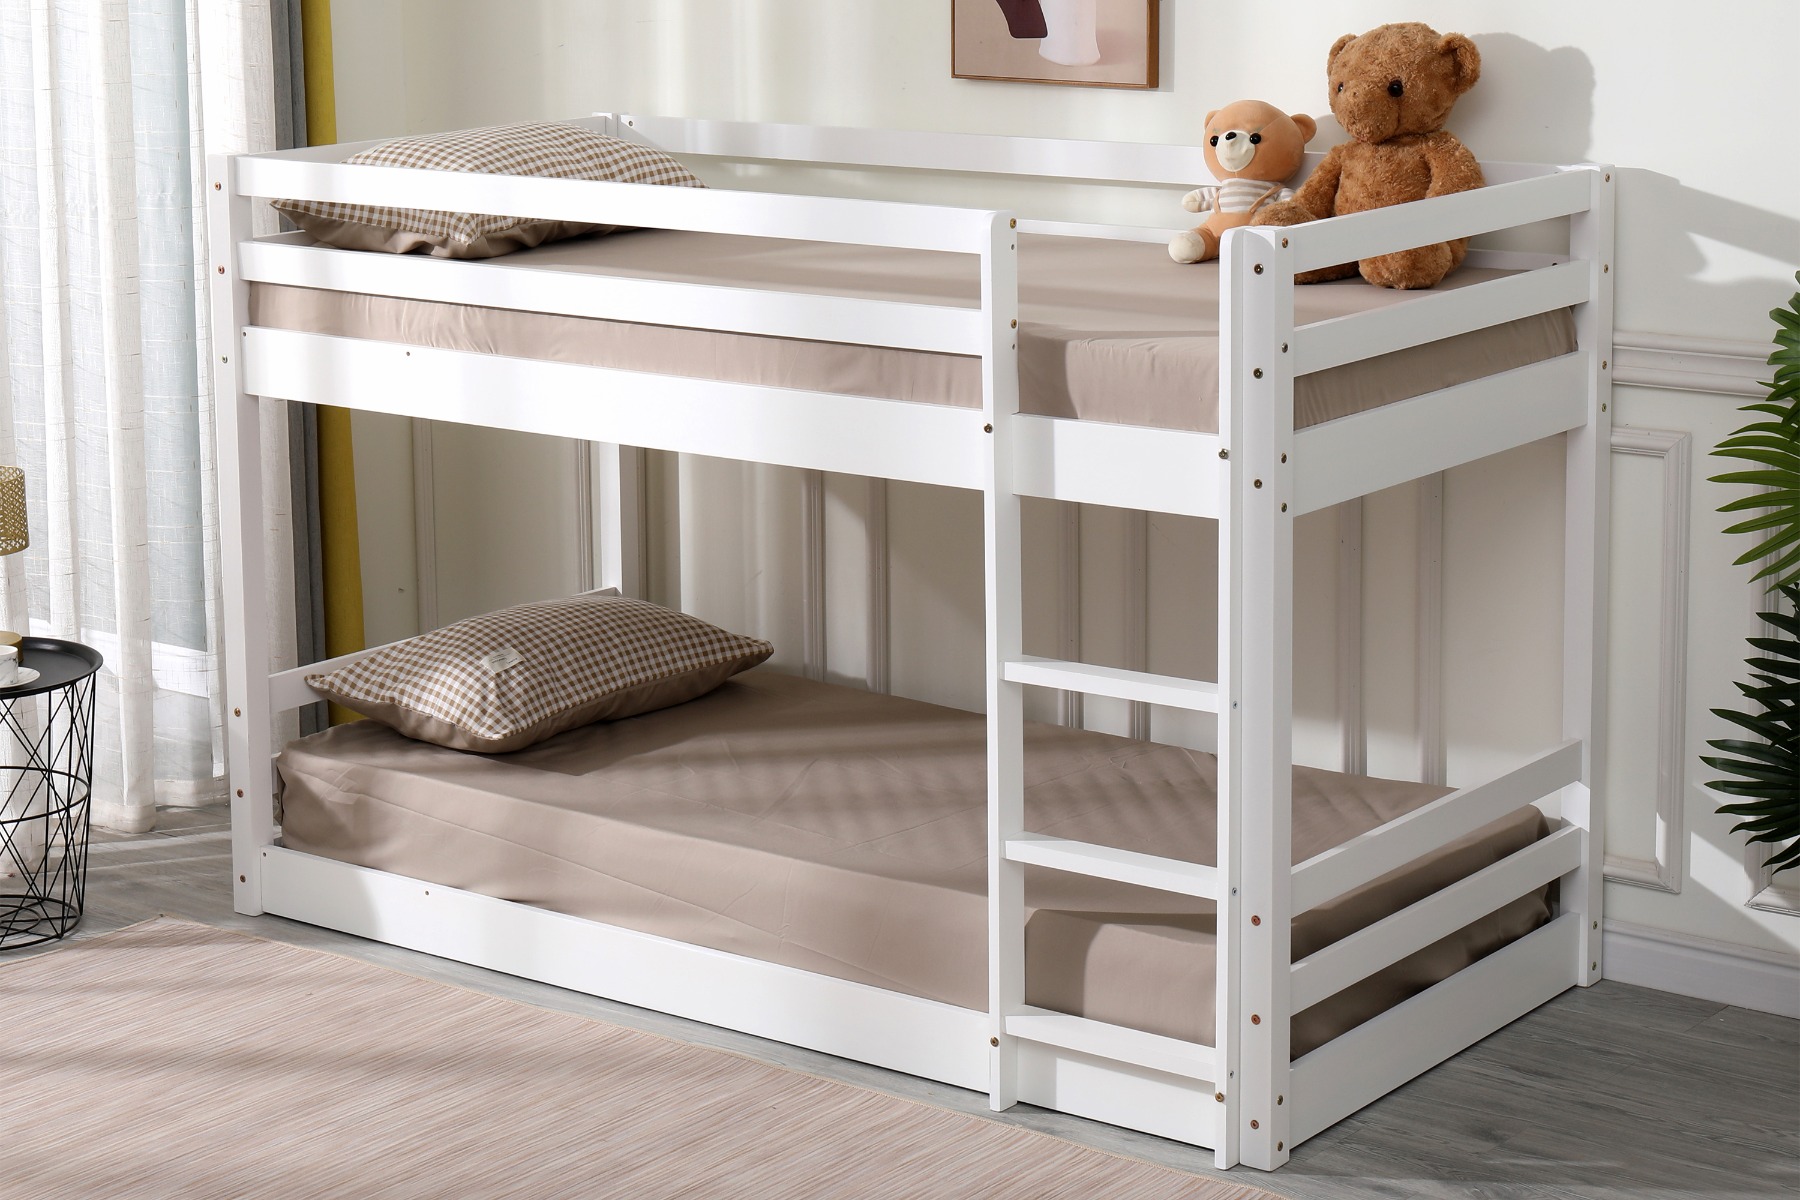 Flair Wooden Spark Low Bunk Bed White